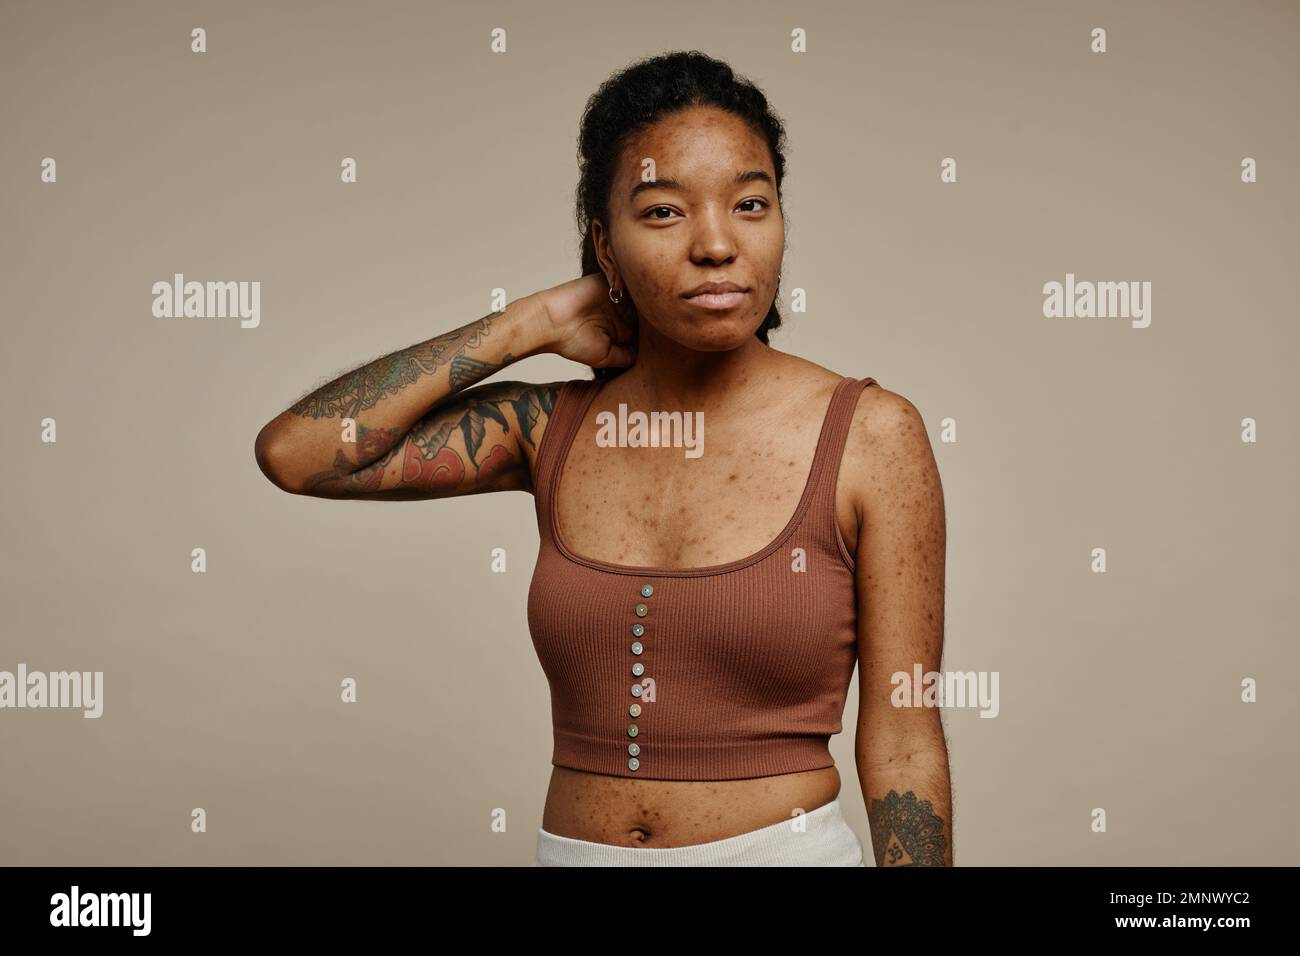 Minimal waist up portrait of ethnic young woman with tattoos looking at camera focus on real skin texture Stock Photo